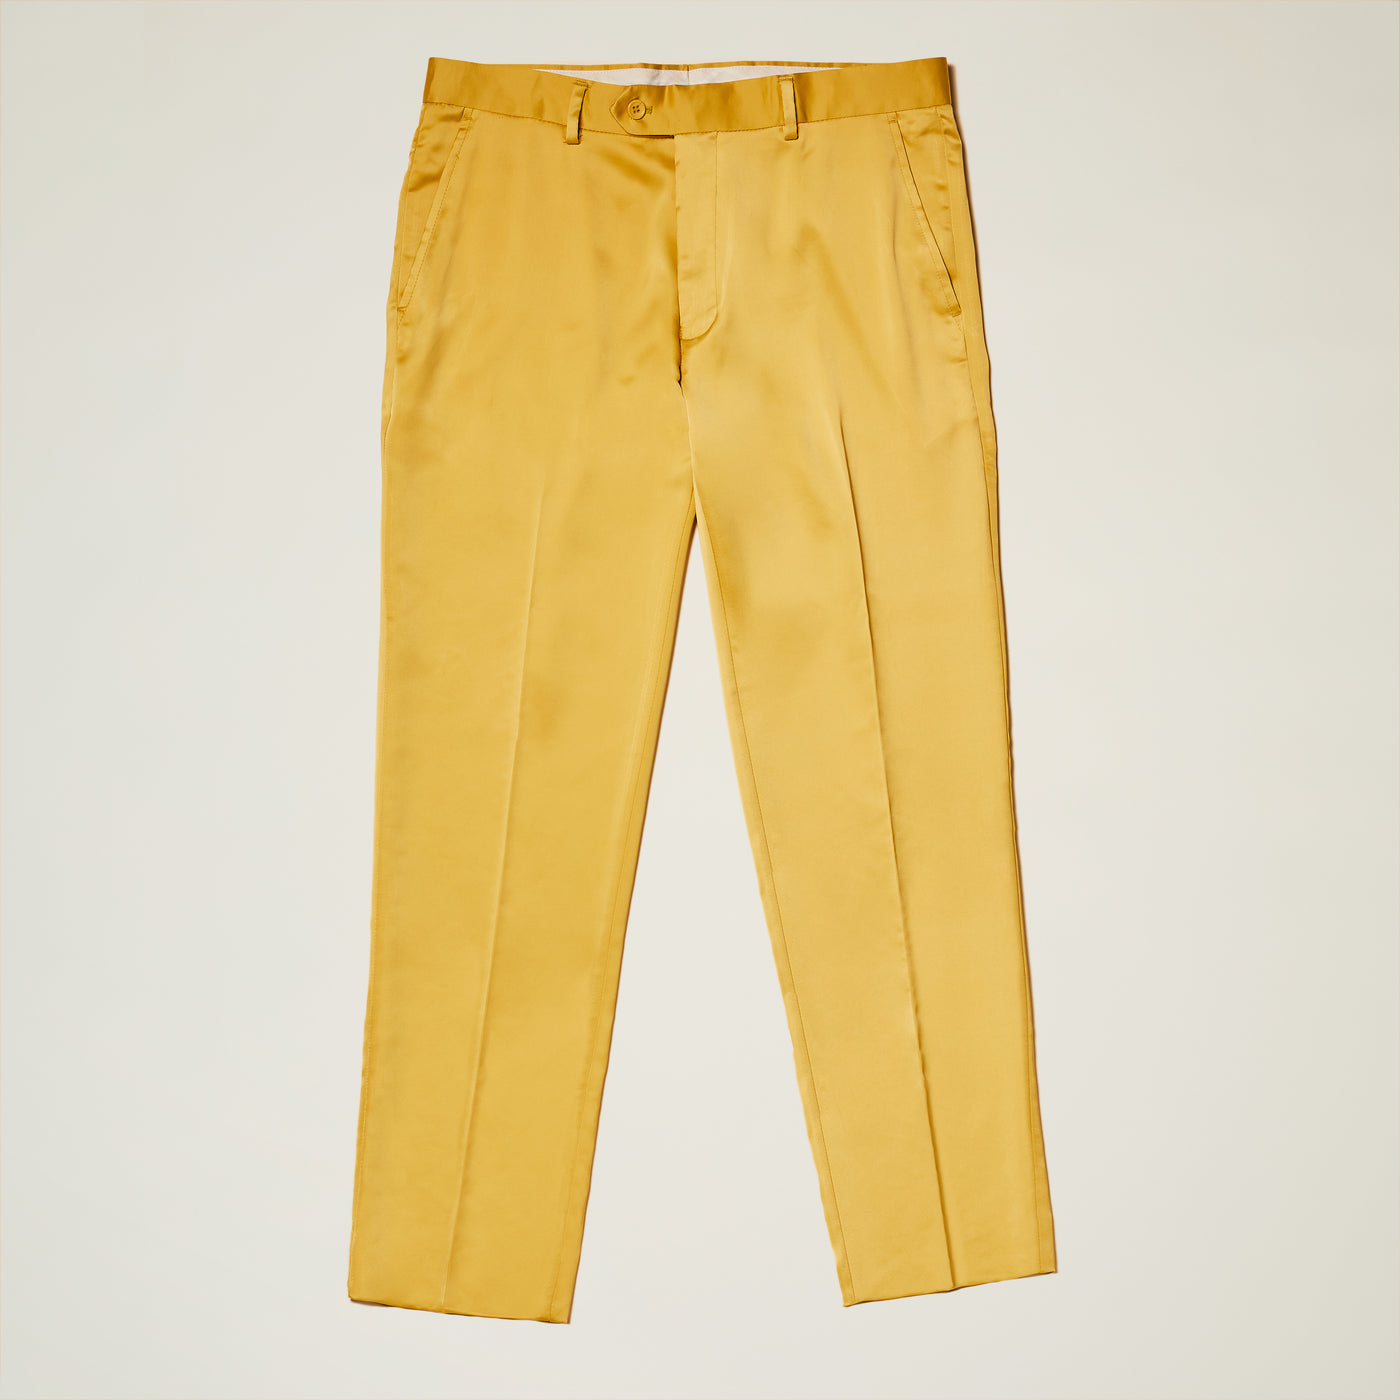 Satin Pants with Stretch - INSERCH